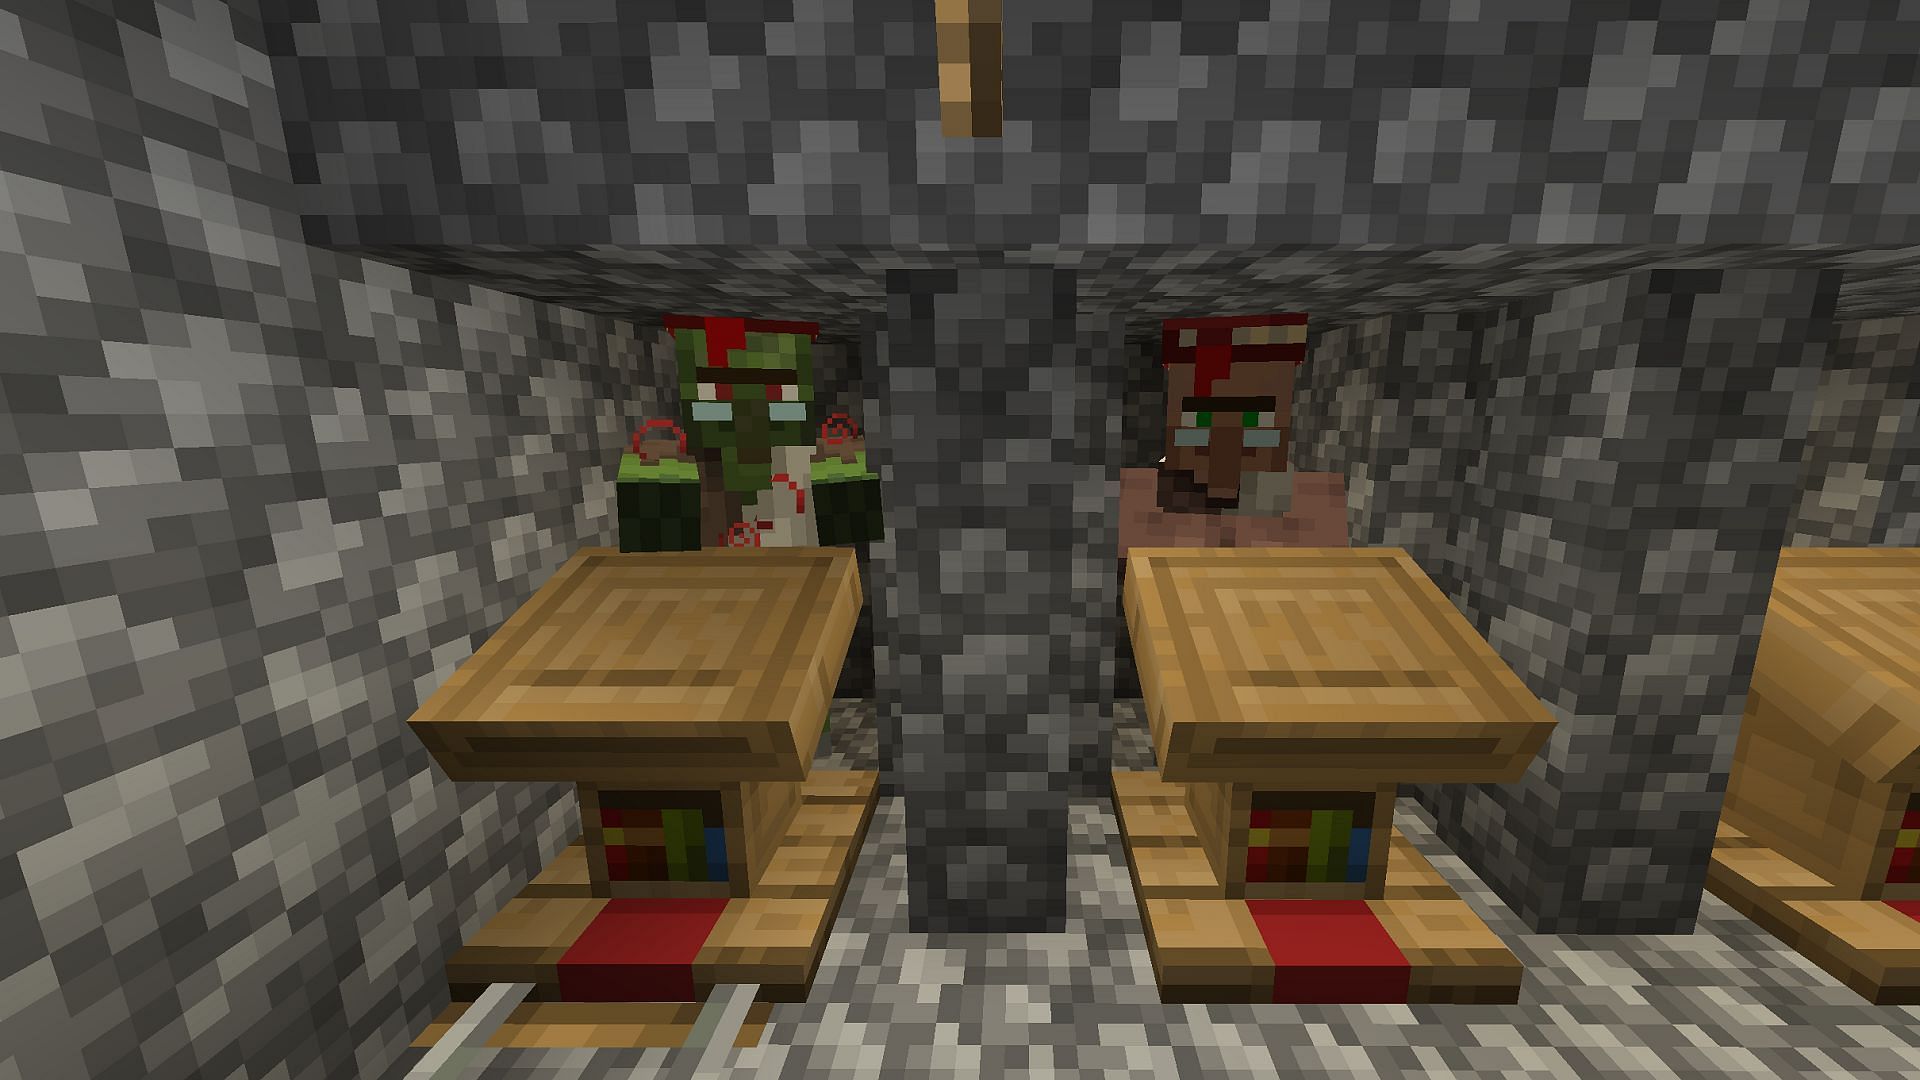 A zombie villager stands in a trading hall in Minecraft.